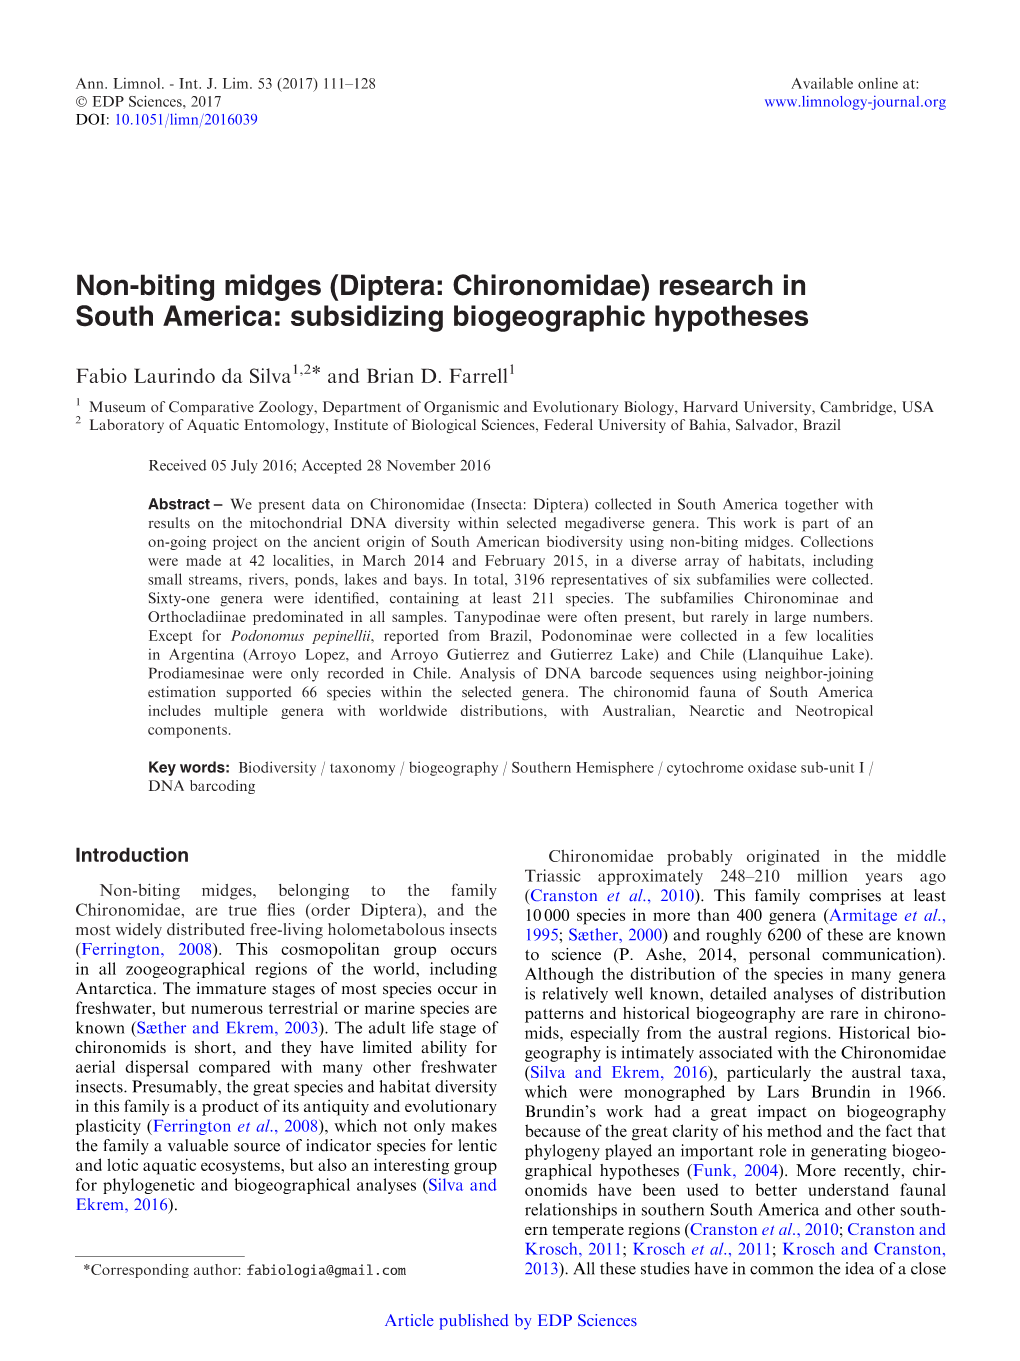 Diptera: Chironomidae) Research in South America: Subsidizing Biogeographic Hypotheses